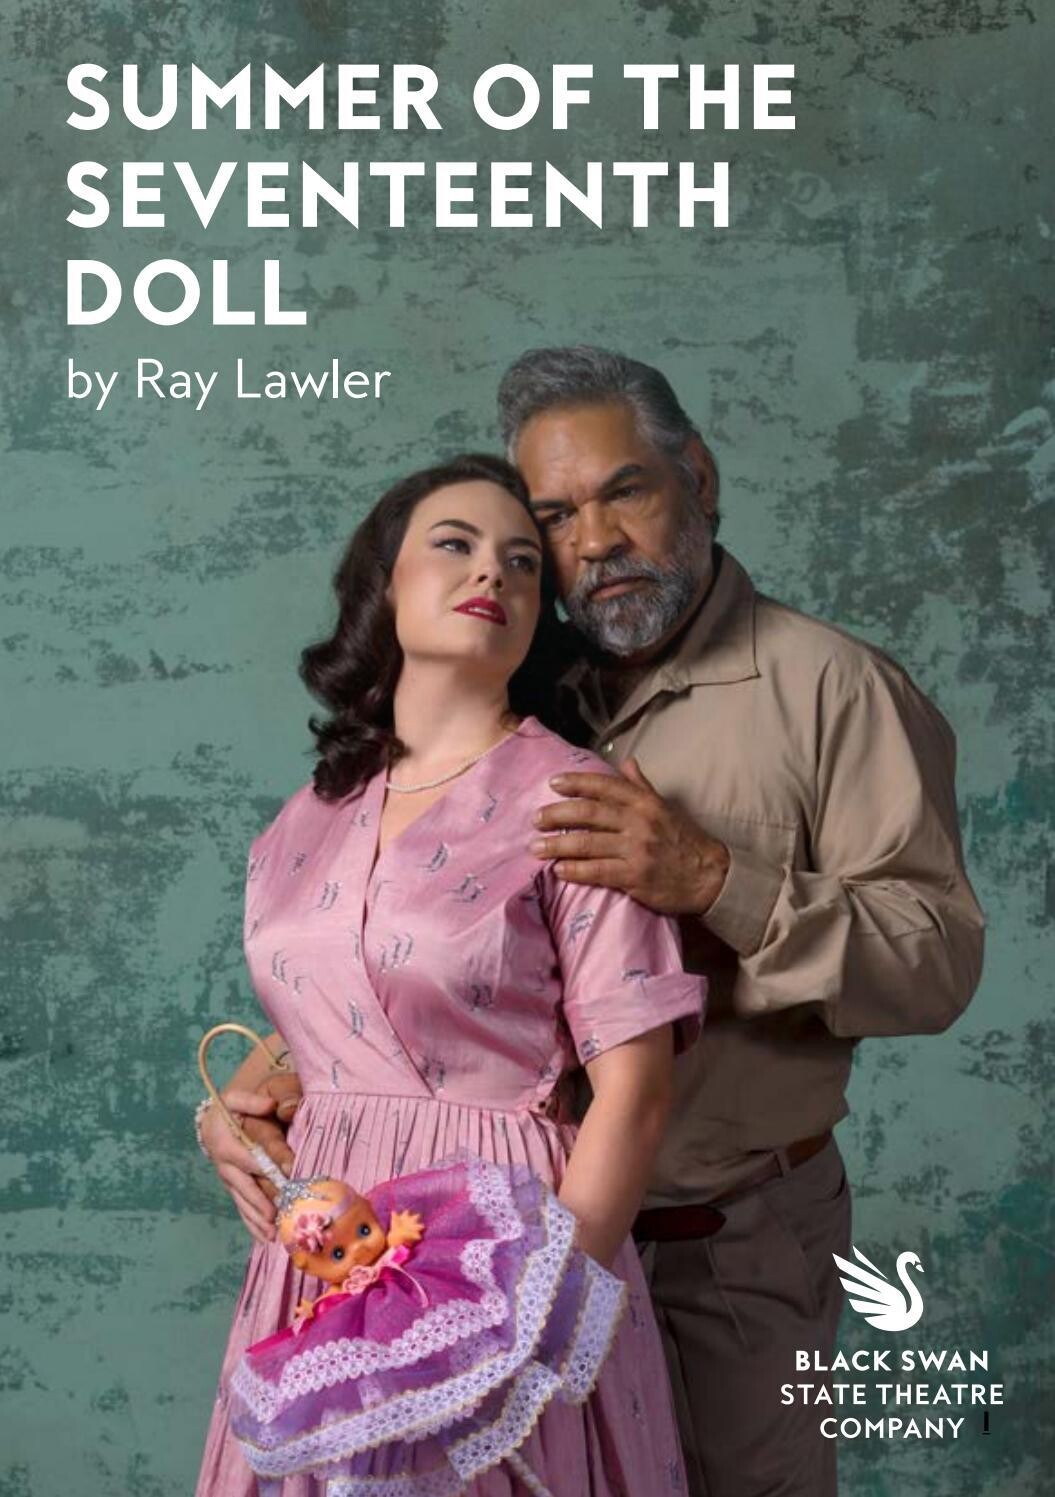 Summer of the Seventeenth Doll by Ray Lawler